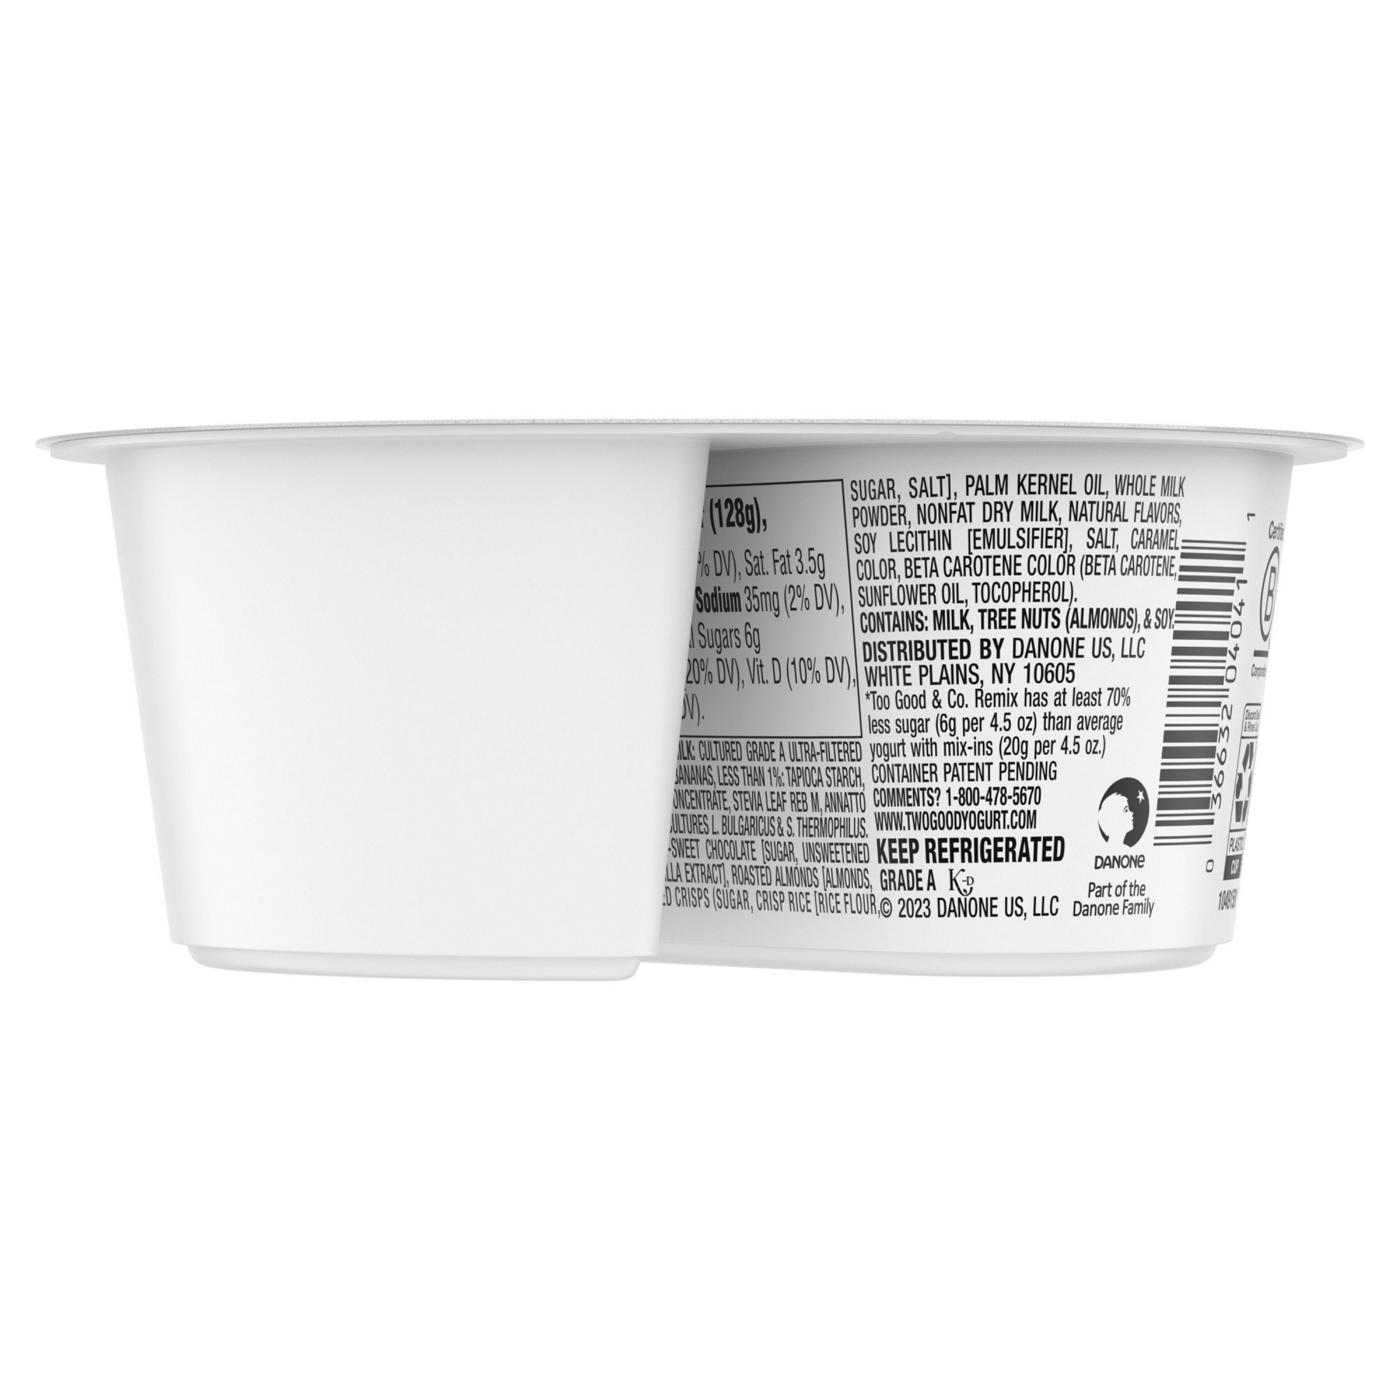 Too Good & Co. Remix Banana Flavored Low Fat Greek Yogurt-Cultured Ultra-Filtered Low Fat; image 6 of 9